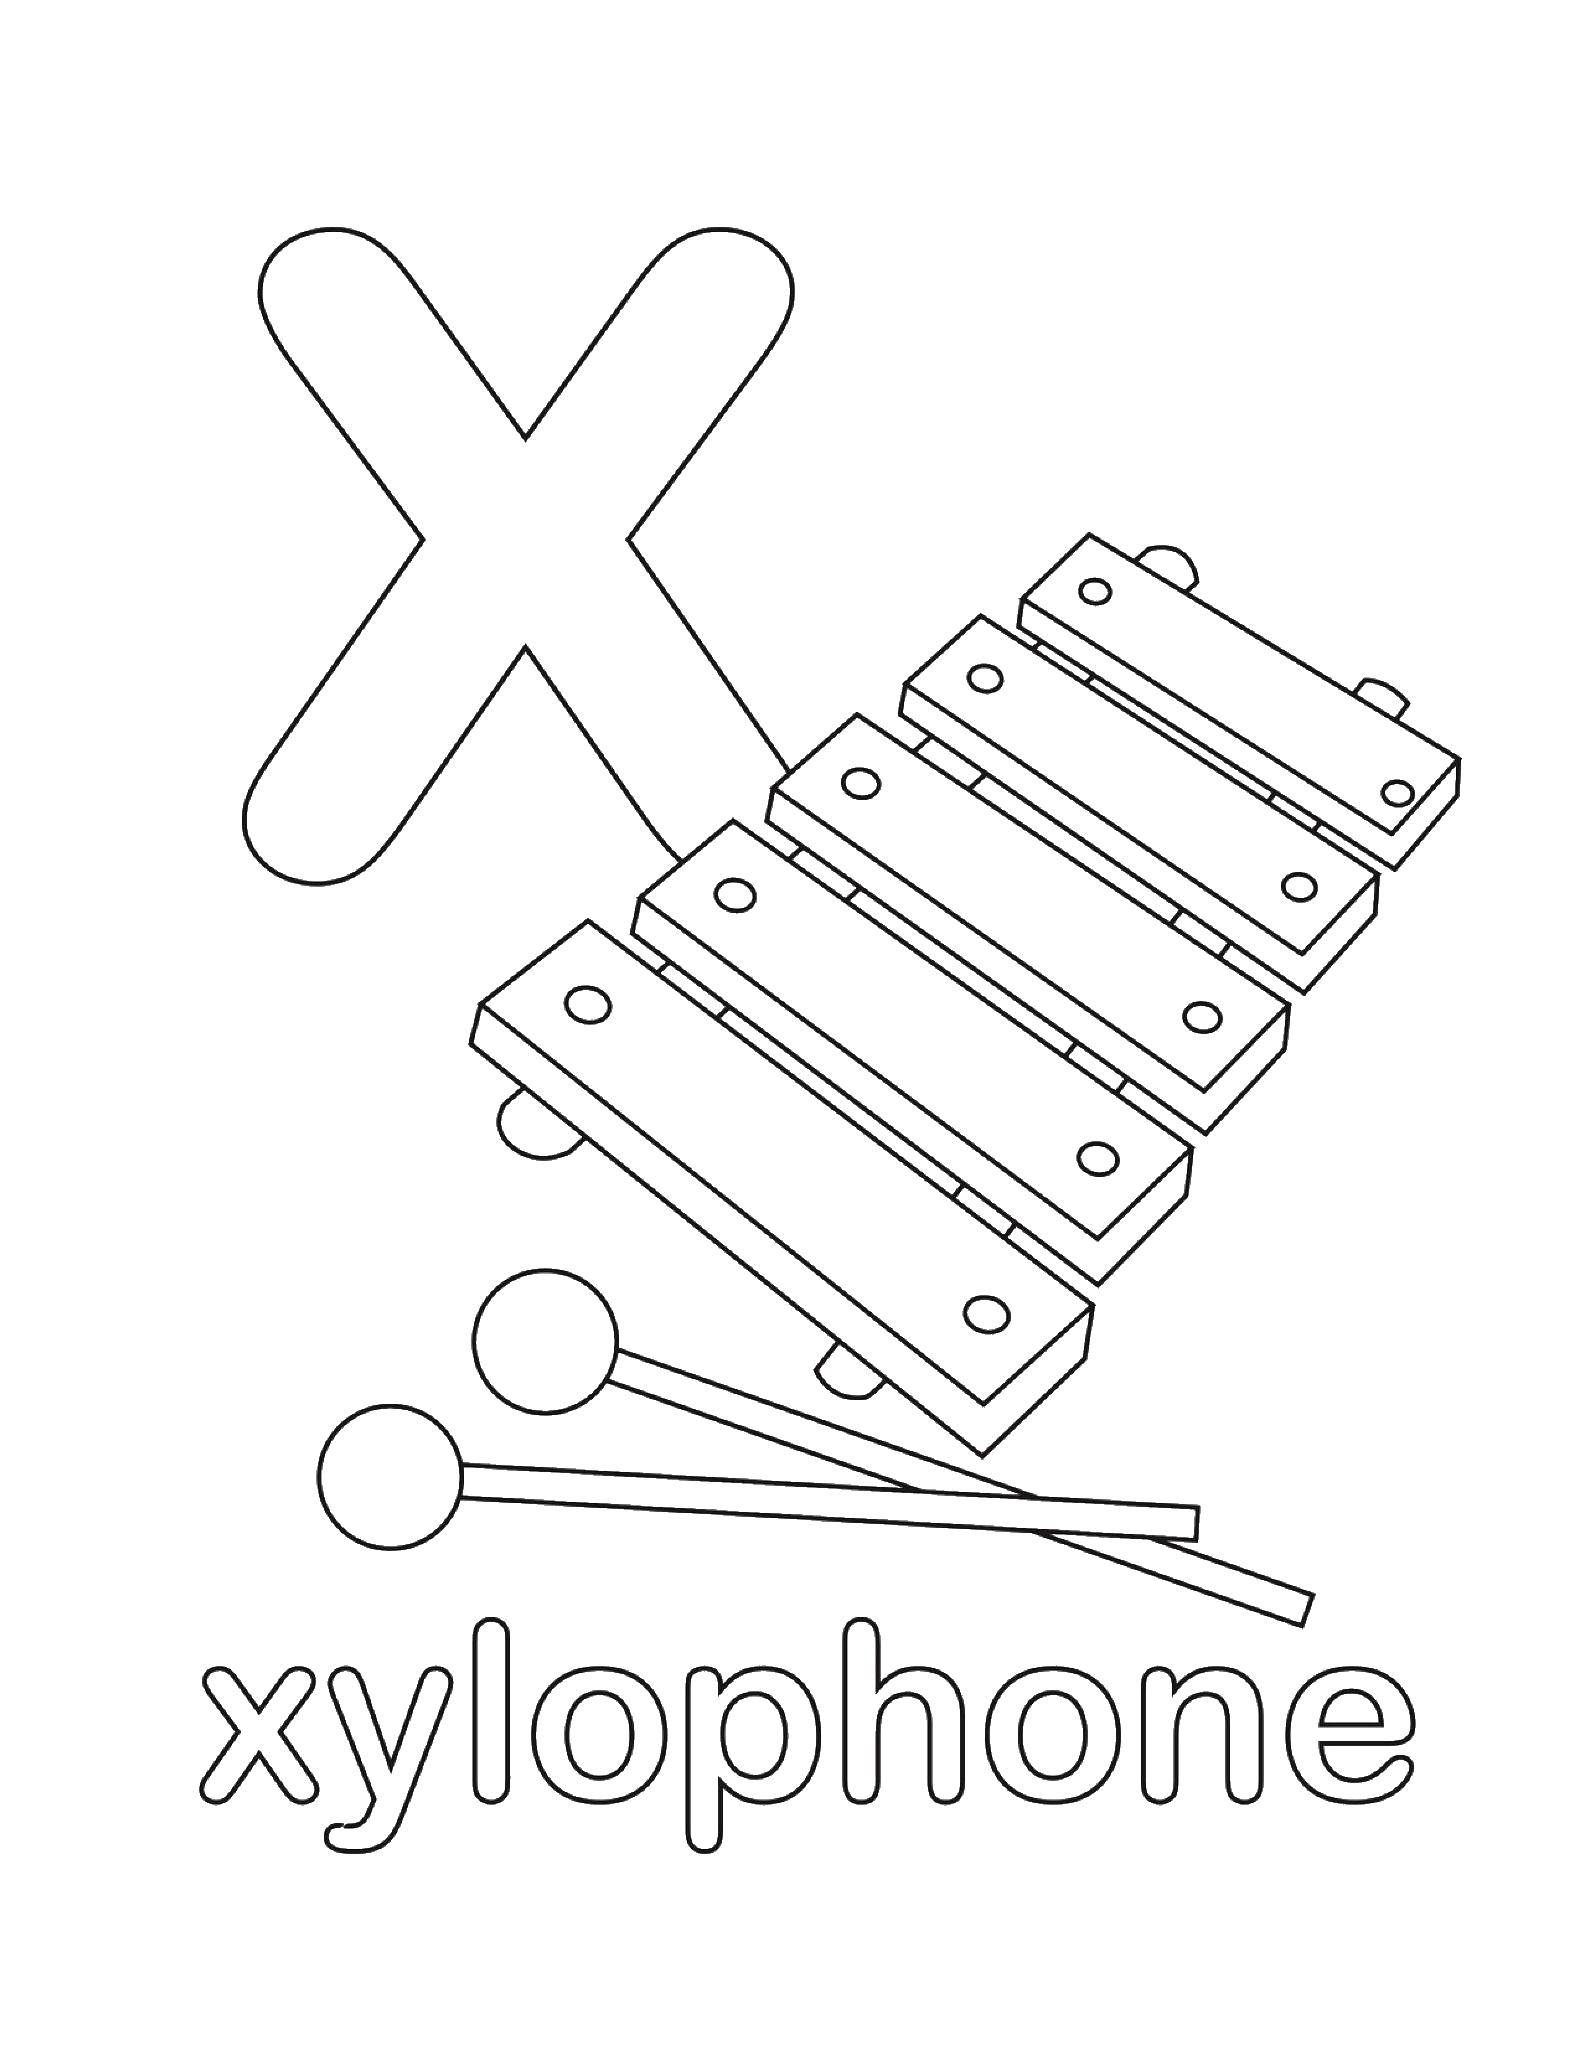 Coloring To xylophone. Category English words. Tags:  English.